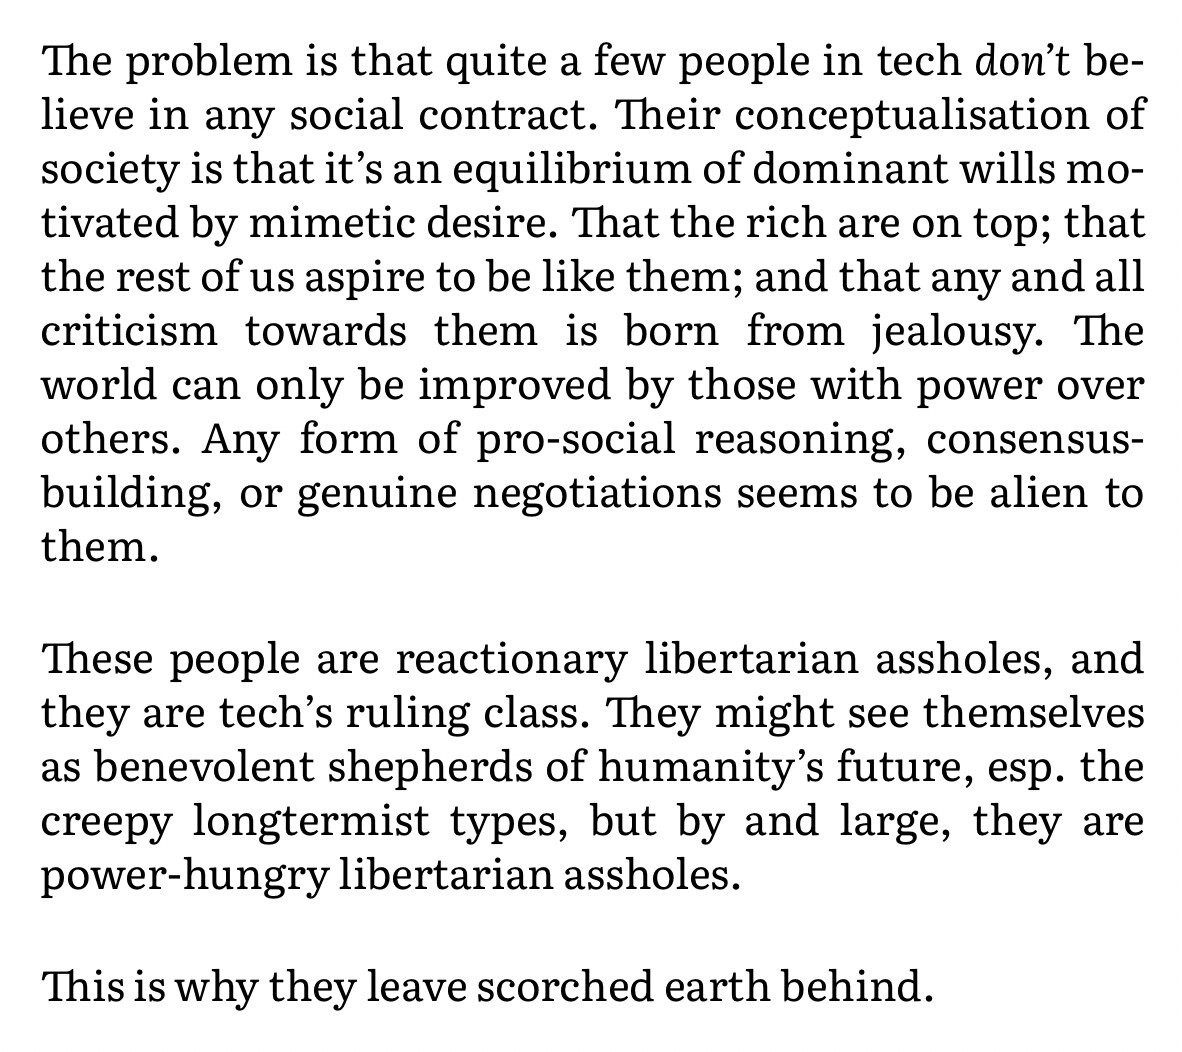 Text:

The problem is that quite a few people in tech don't believe in any social contract. Their conceptualisation of society is that it's an equilibrium of dominant wills motivated by mimetic desire. That the rich are on top; that the rest of us aspire to be like them; and that any and all criticism towards them is born from jealousy. The world can only be improved by those with power over others. Any form of pro-social reasoning, consensus-building, or genuine negotiations seems to be alien to them.

These people are reactionary libertarian assholes, and they are tech's ruling class. They might see themselves as benevolent shepherds of humanity's future, esp. the creepy longtermist types, but by and large, they are power-hungry libertarian assholes.

This is why they leave scorched earth behind.